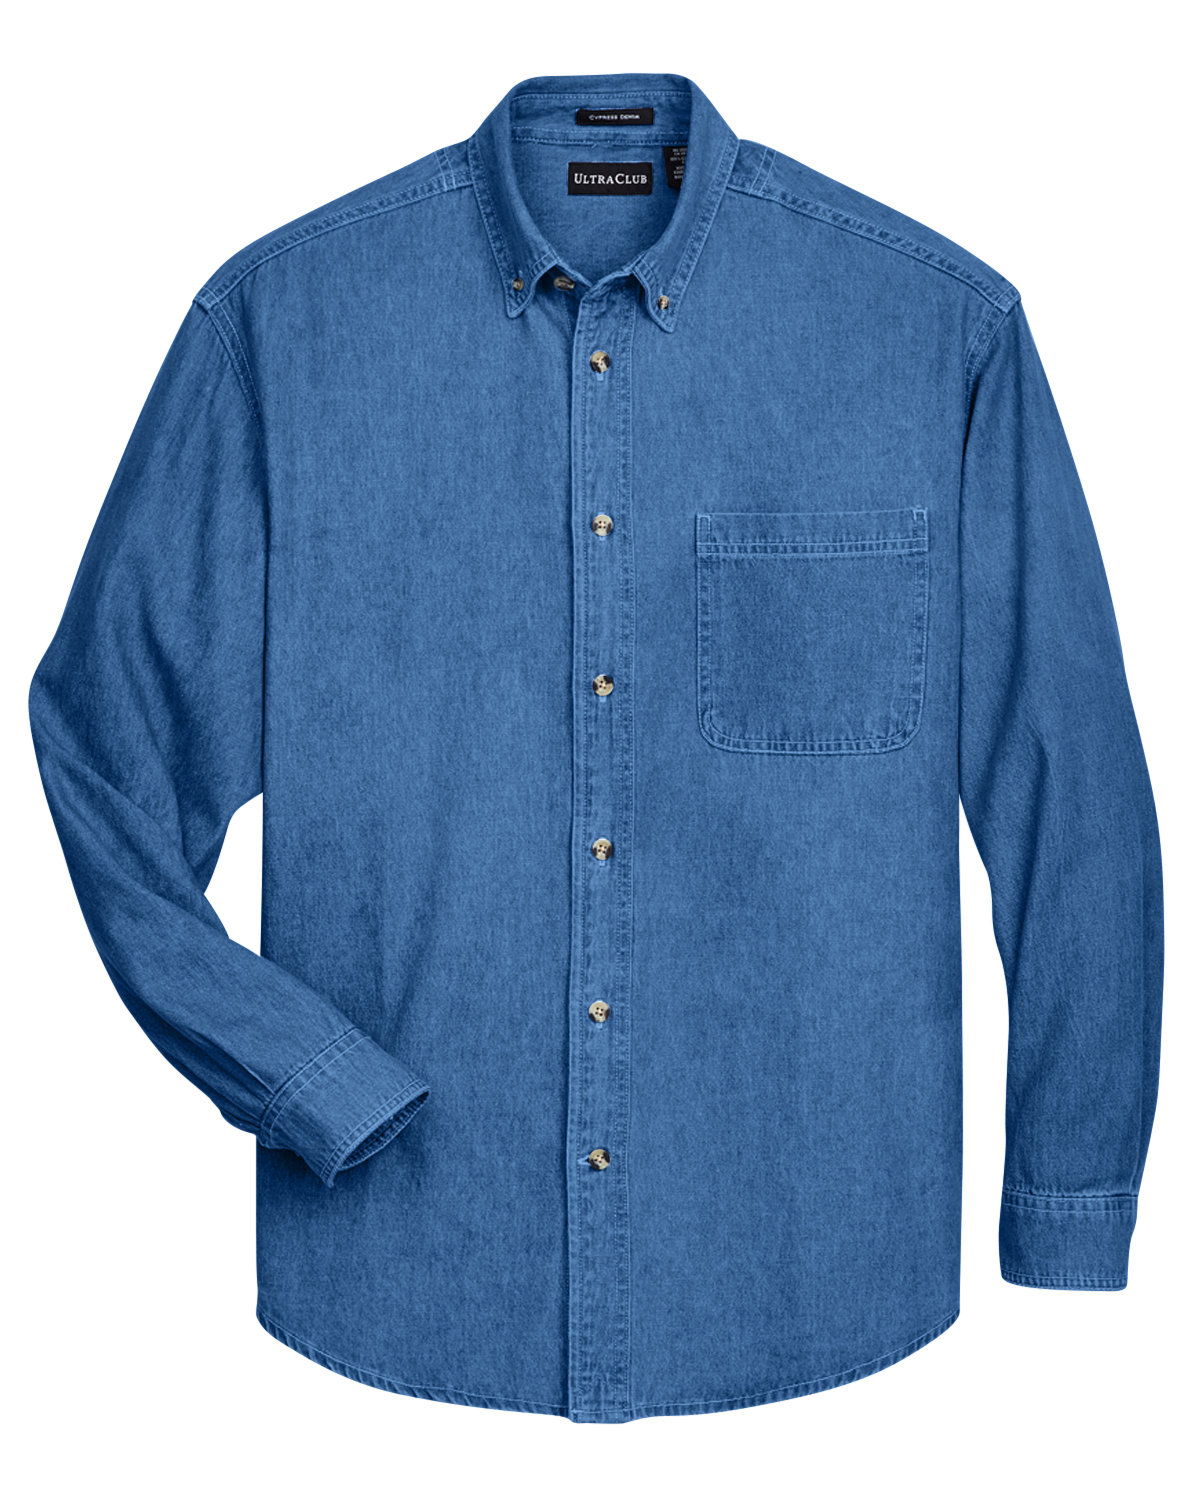 UltraClub Long-Sleeve Cypress Denim with Pocket Solid Button Up Shirt Men/'s 8960